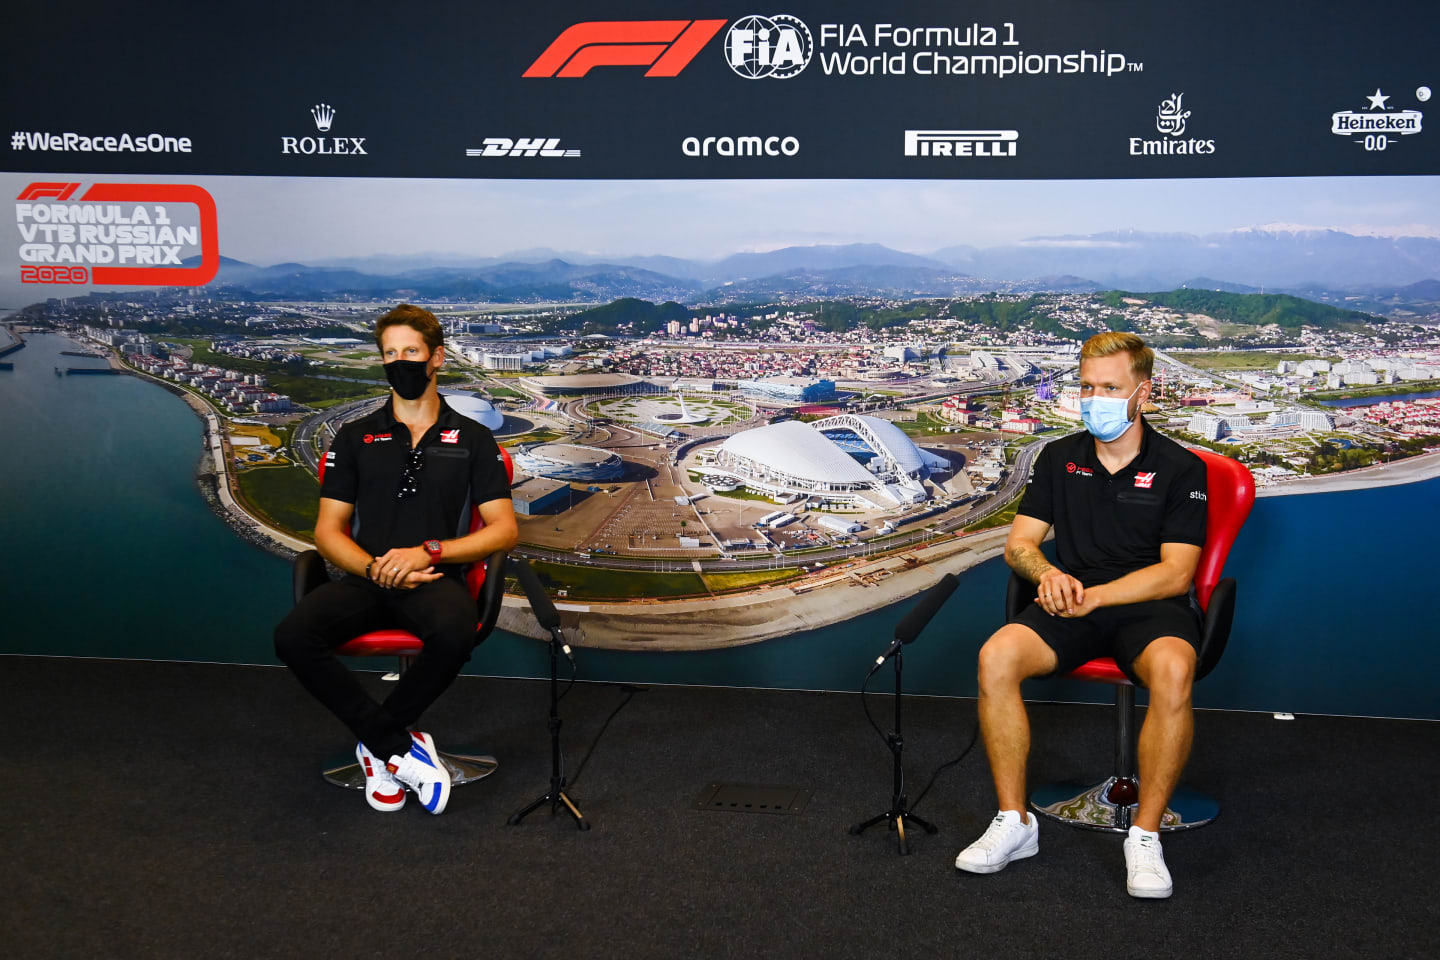 SOCHI, RUSSIA - SEPTEMBER 24: Romain Grosjean of France and Haas F1 and Kevin Magnussen of Denmark